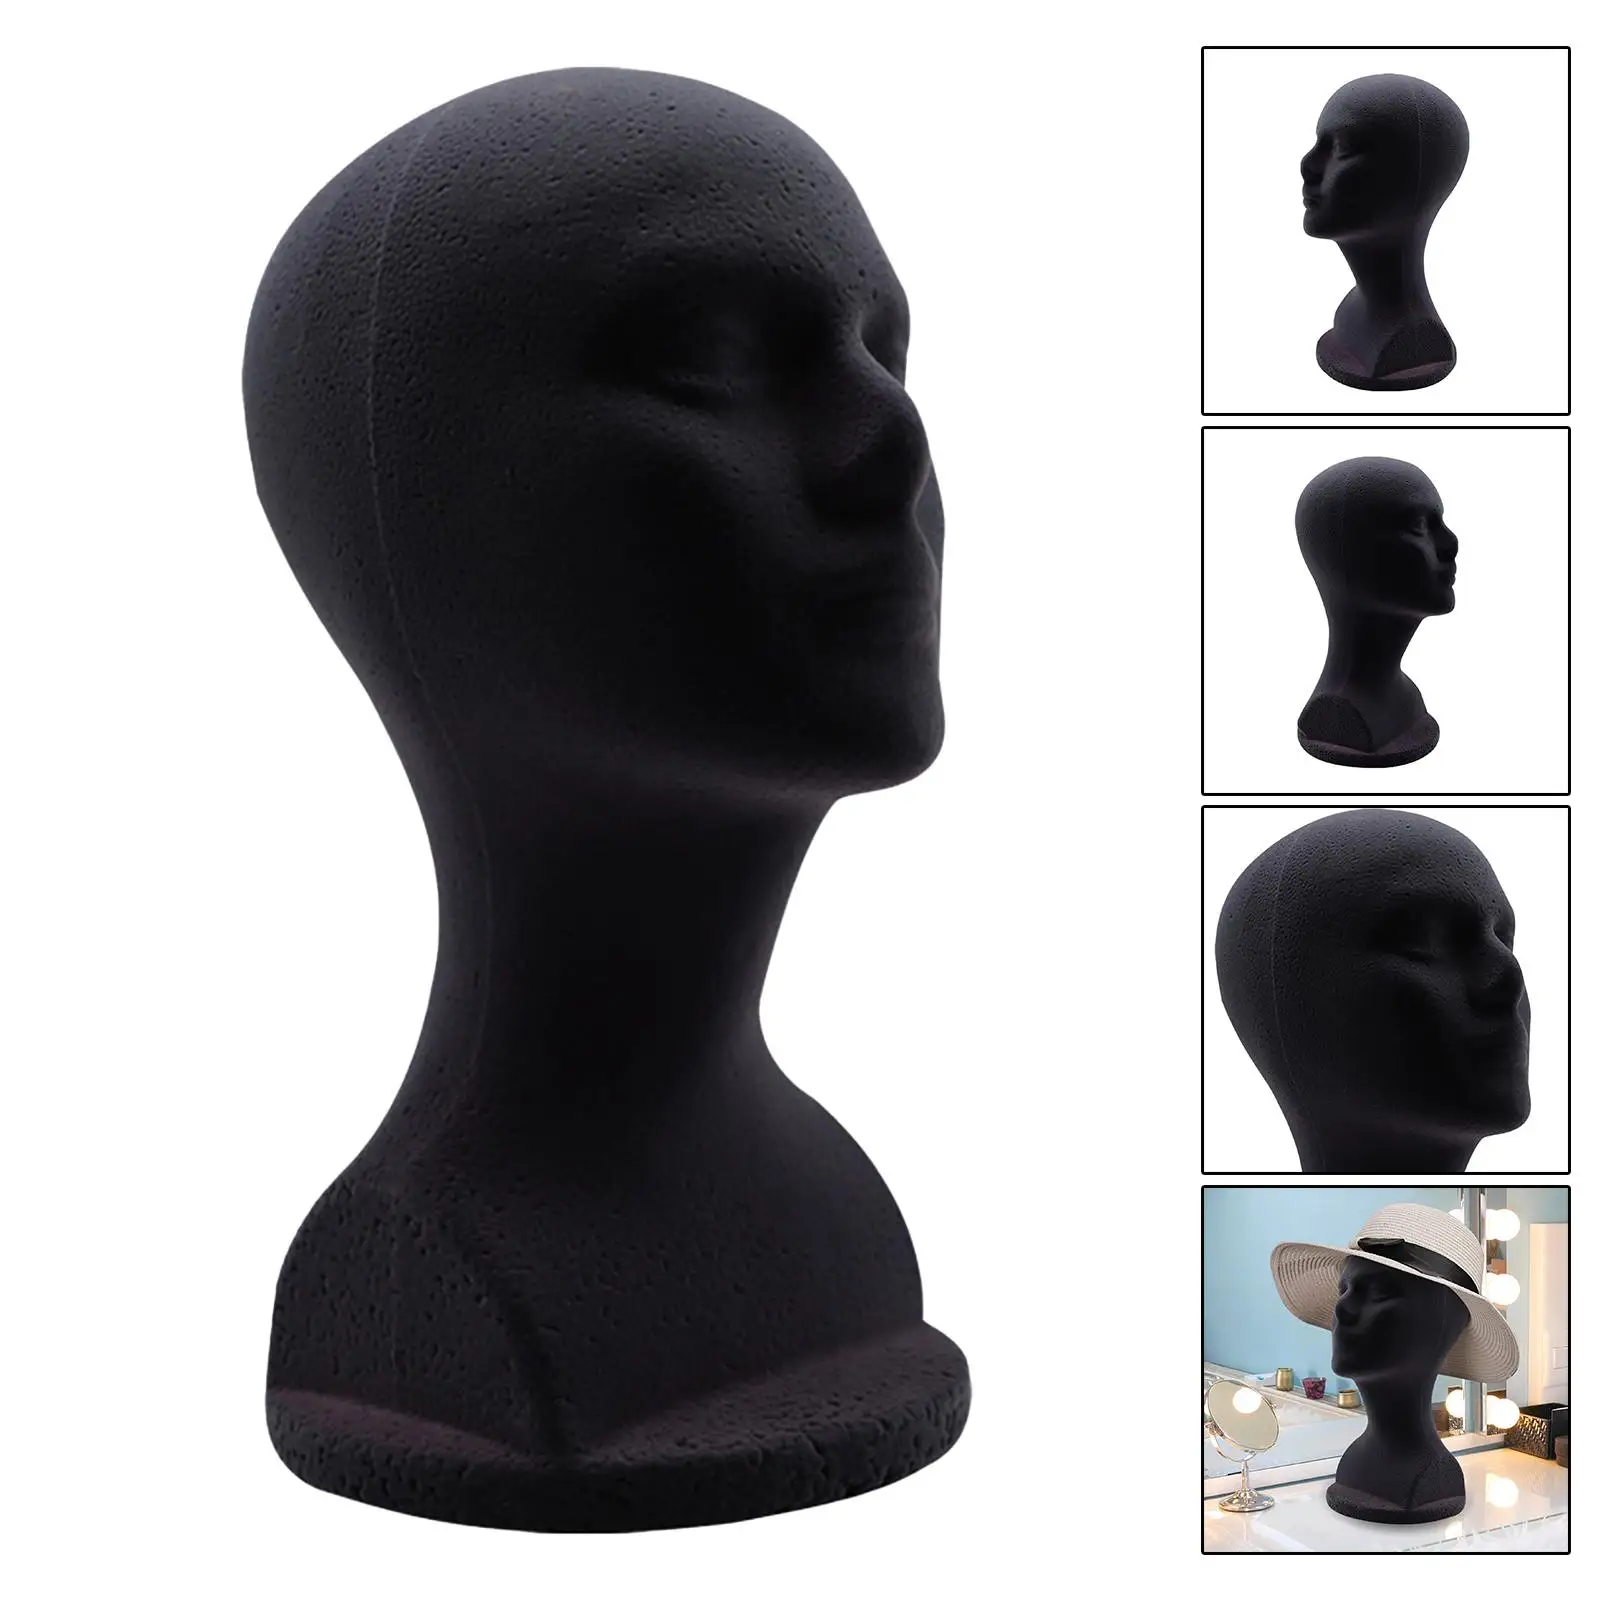 Man Styrofoam Mannequin Head Model Hat Display Stand Black 48.5cm Head Circumference Accessories 12.6 inch Tall DIY Stable Base